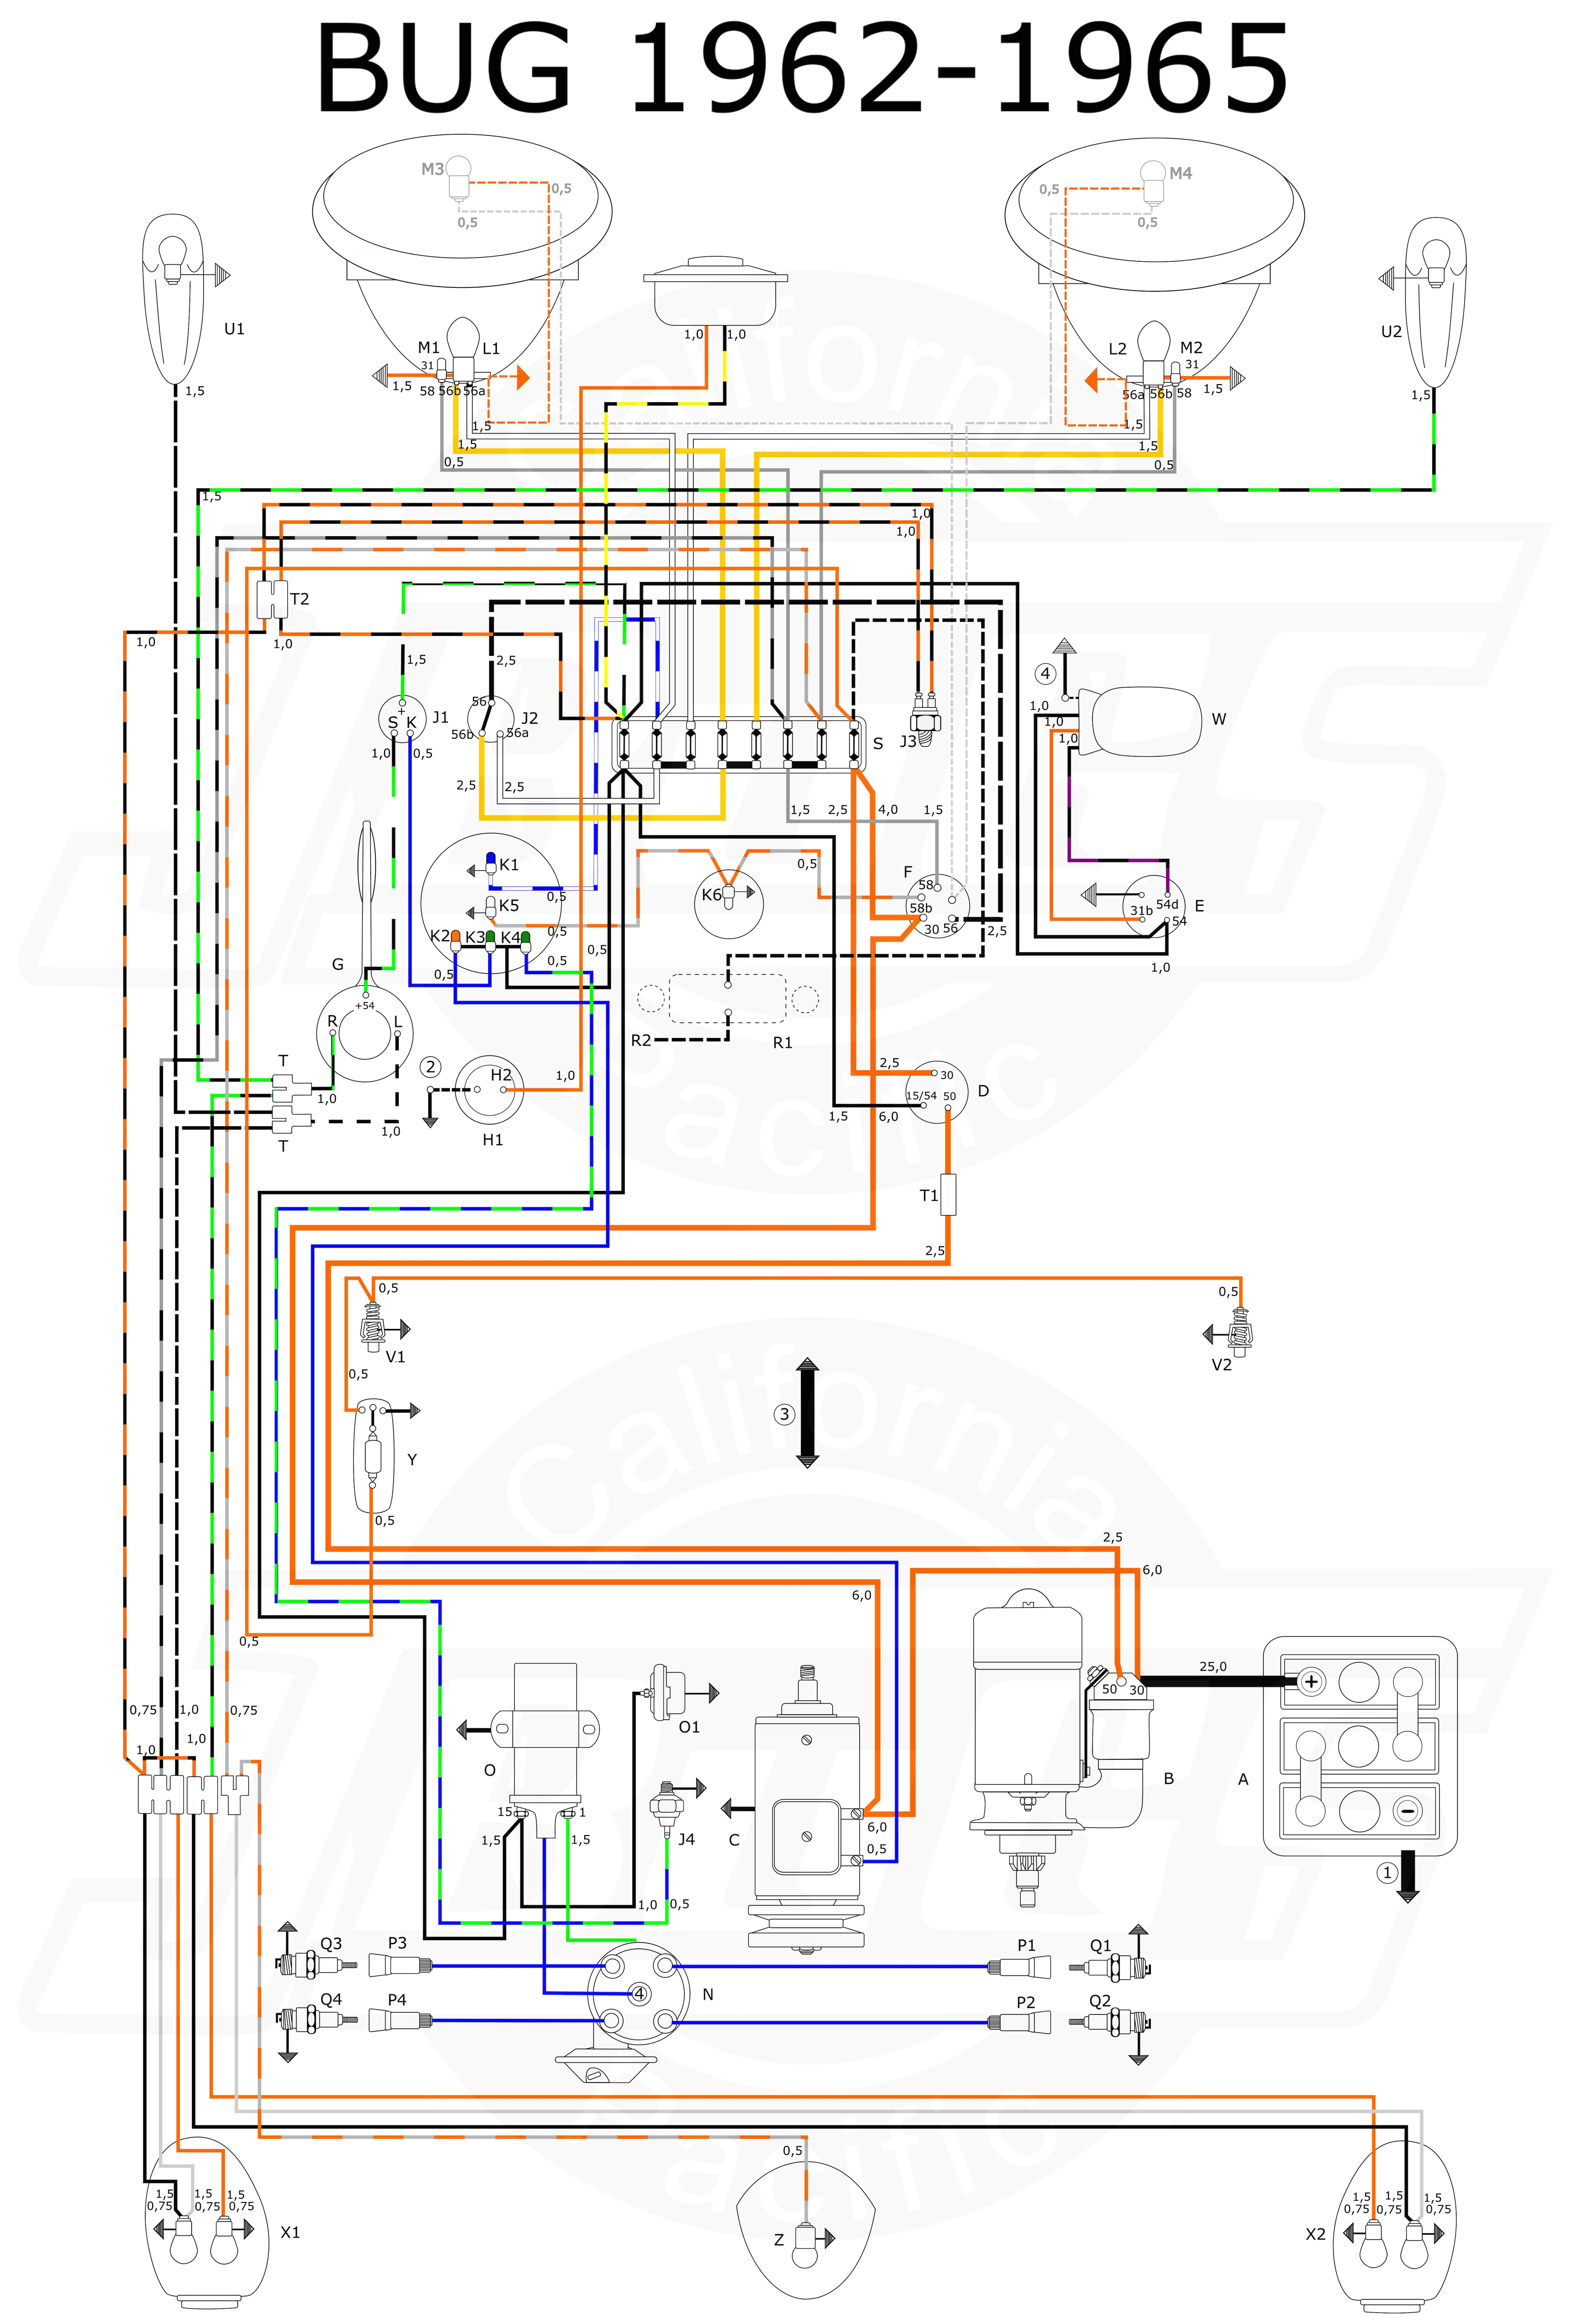 ecore coil wiring gm wiring diagram database ecore coil wiring gm